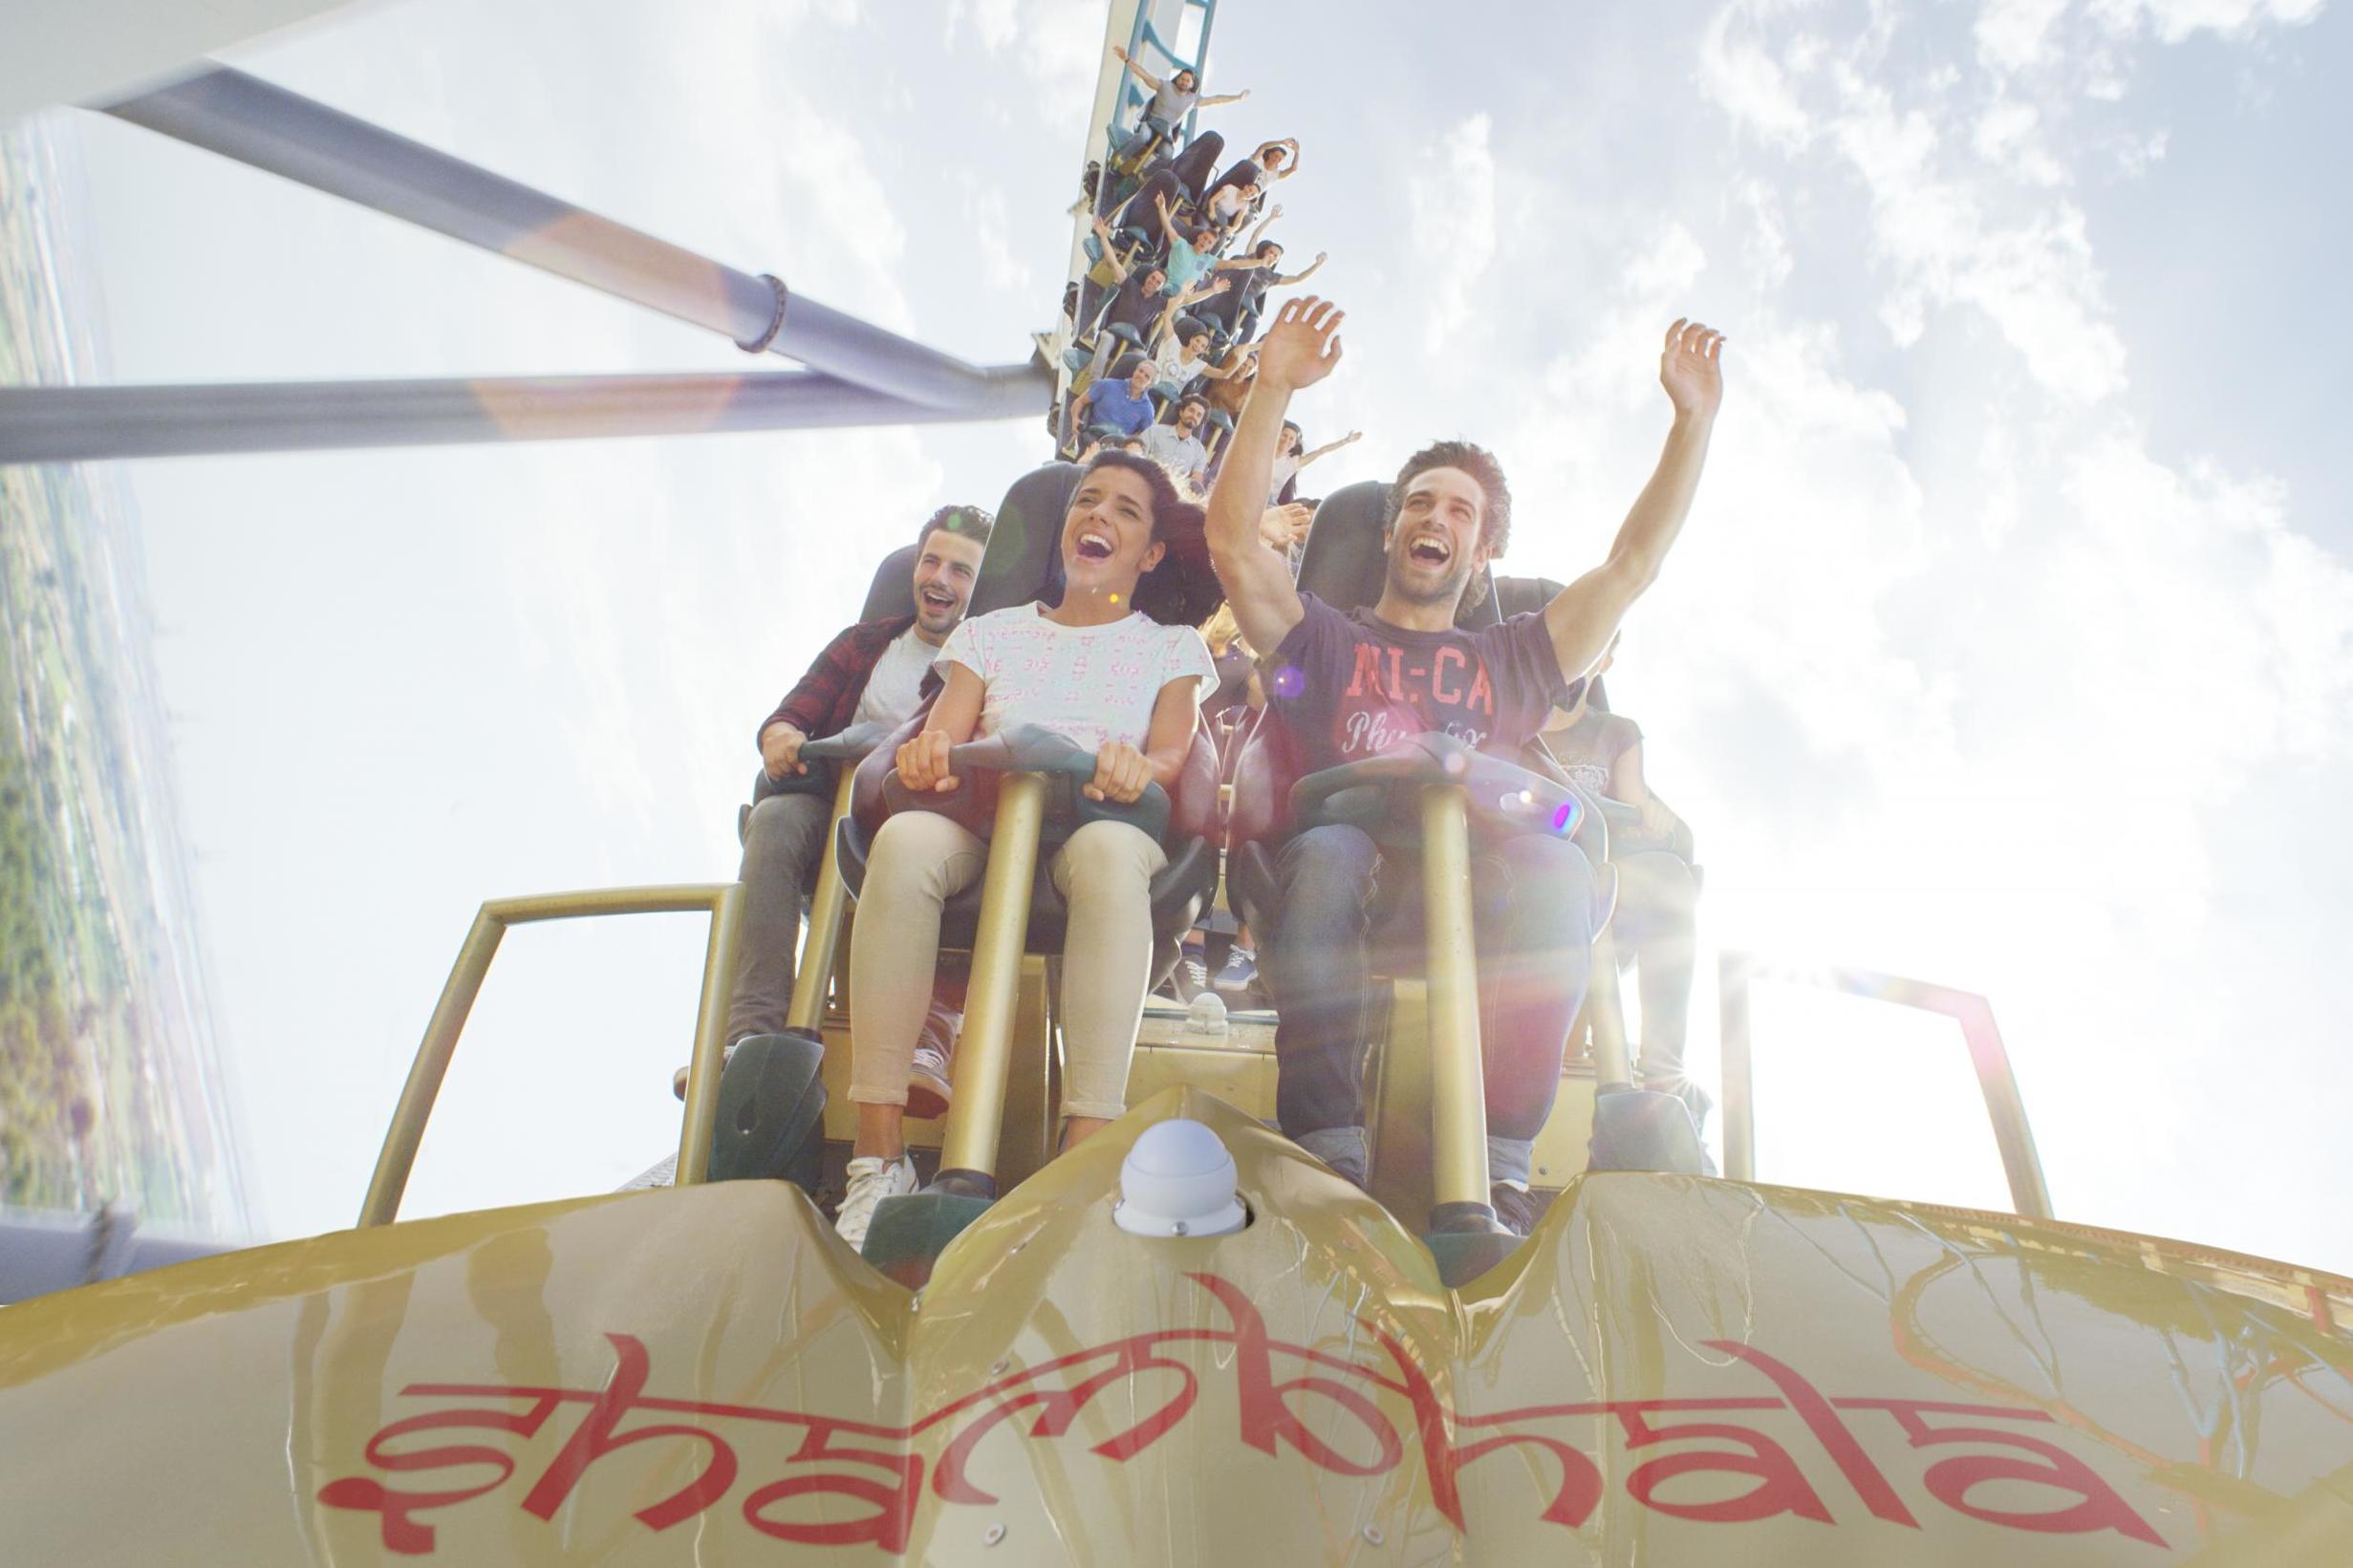 PortAventura offers a thrilling day out